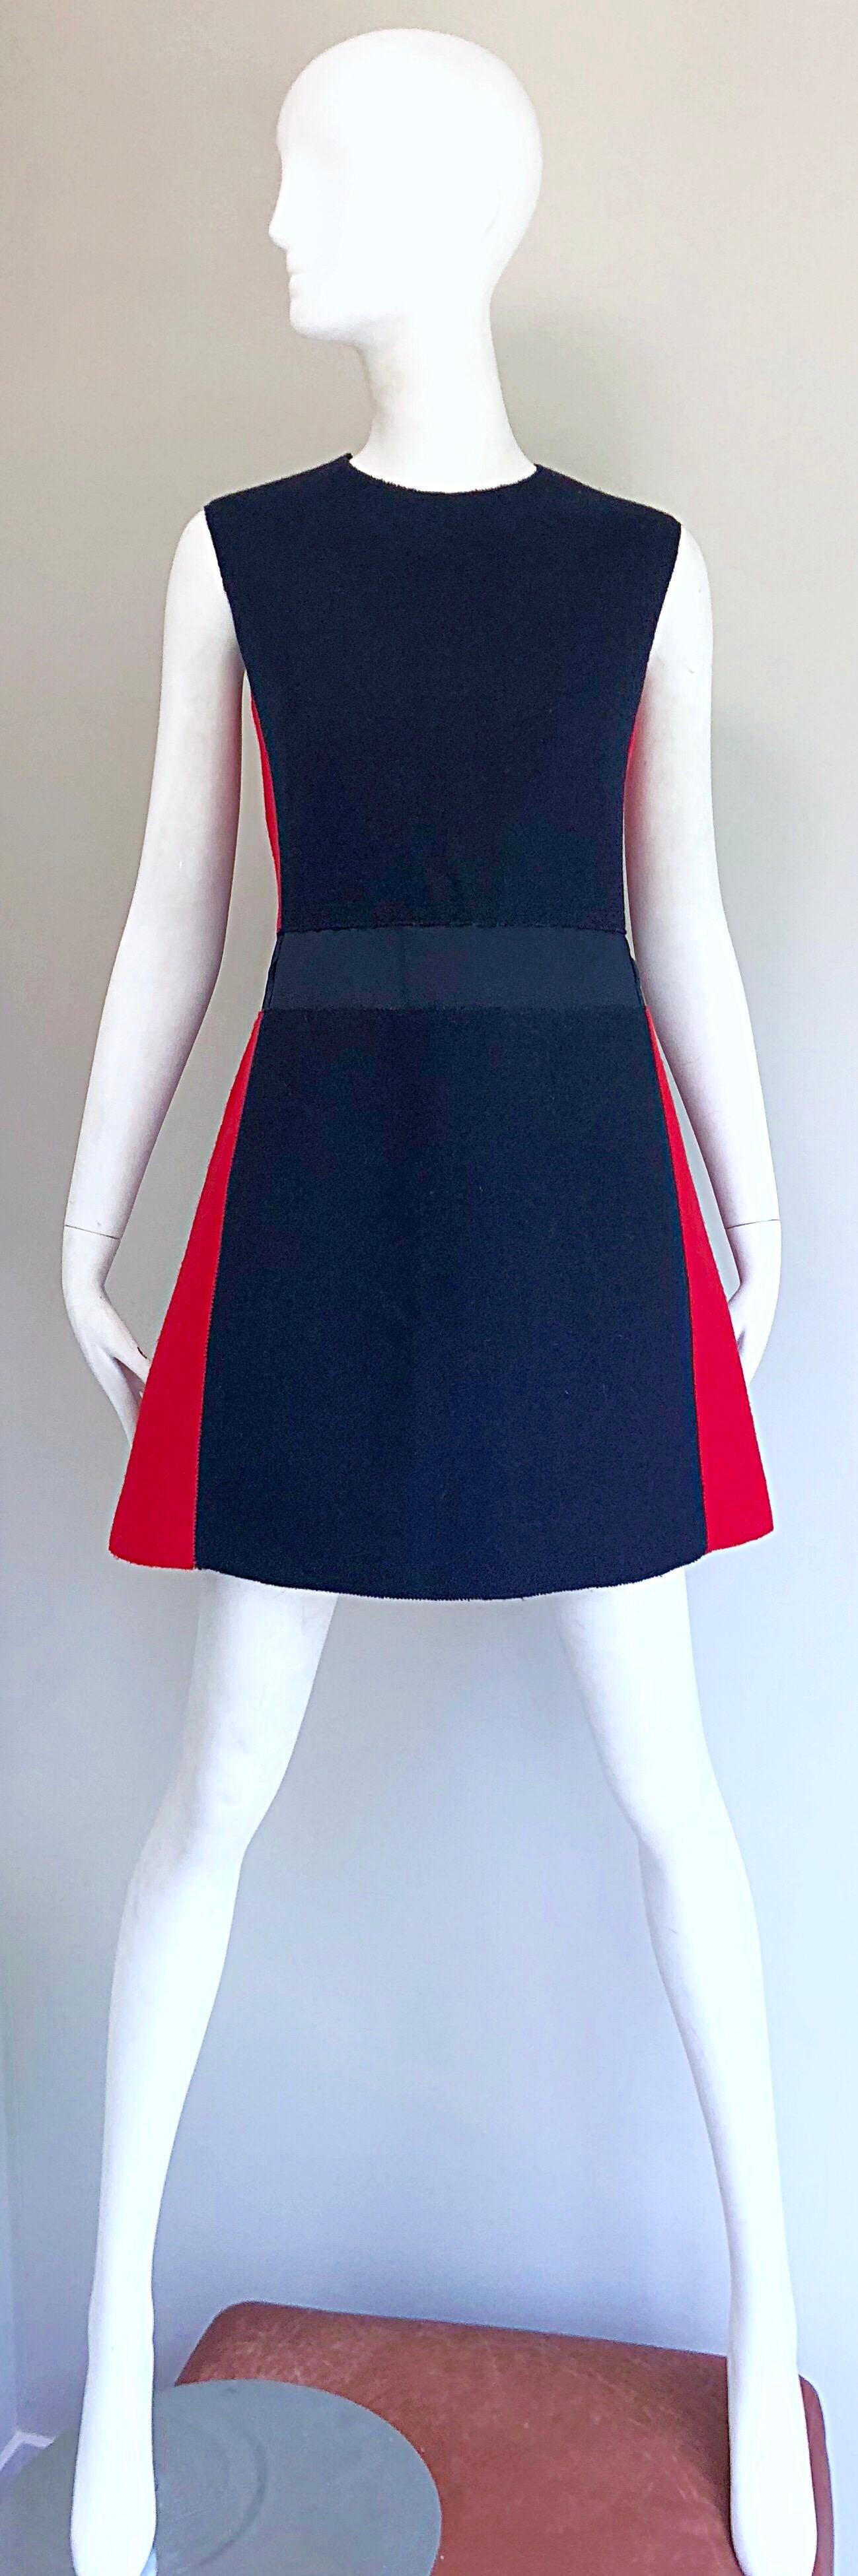 Incredibly chic early 2000s does 1960s MIU MIU navy blue and red color block A - Line nautical dress! Features soft virgin wool. Sleek tailored bodice with a flattering A-Line skirt. Hidden zipper up the back with hoo-and-eye closure. Great to go